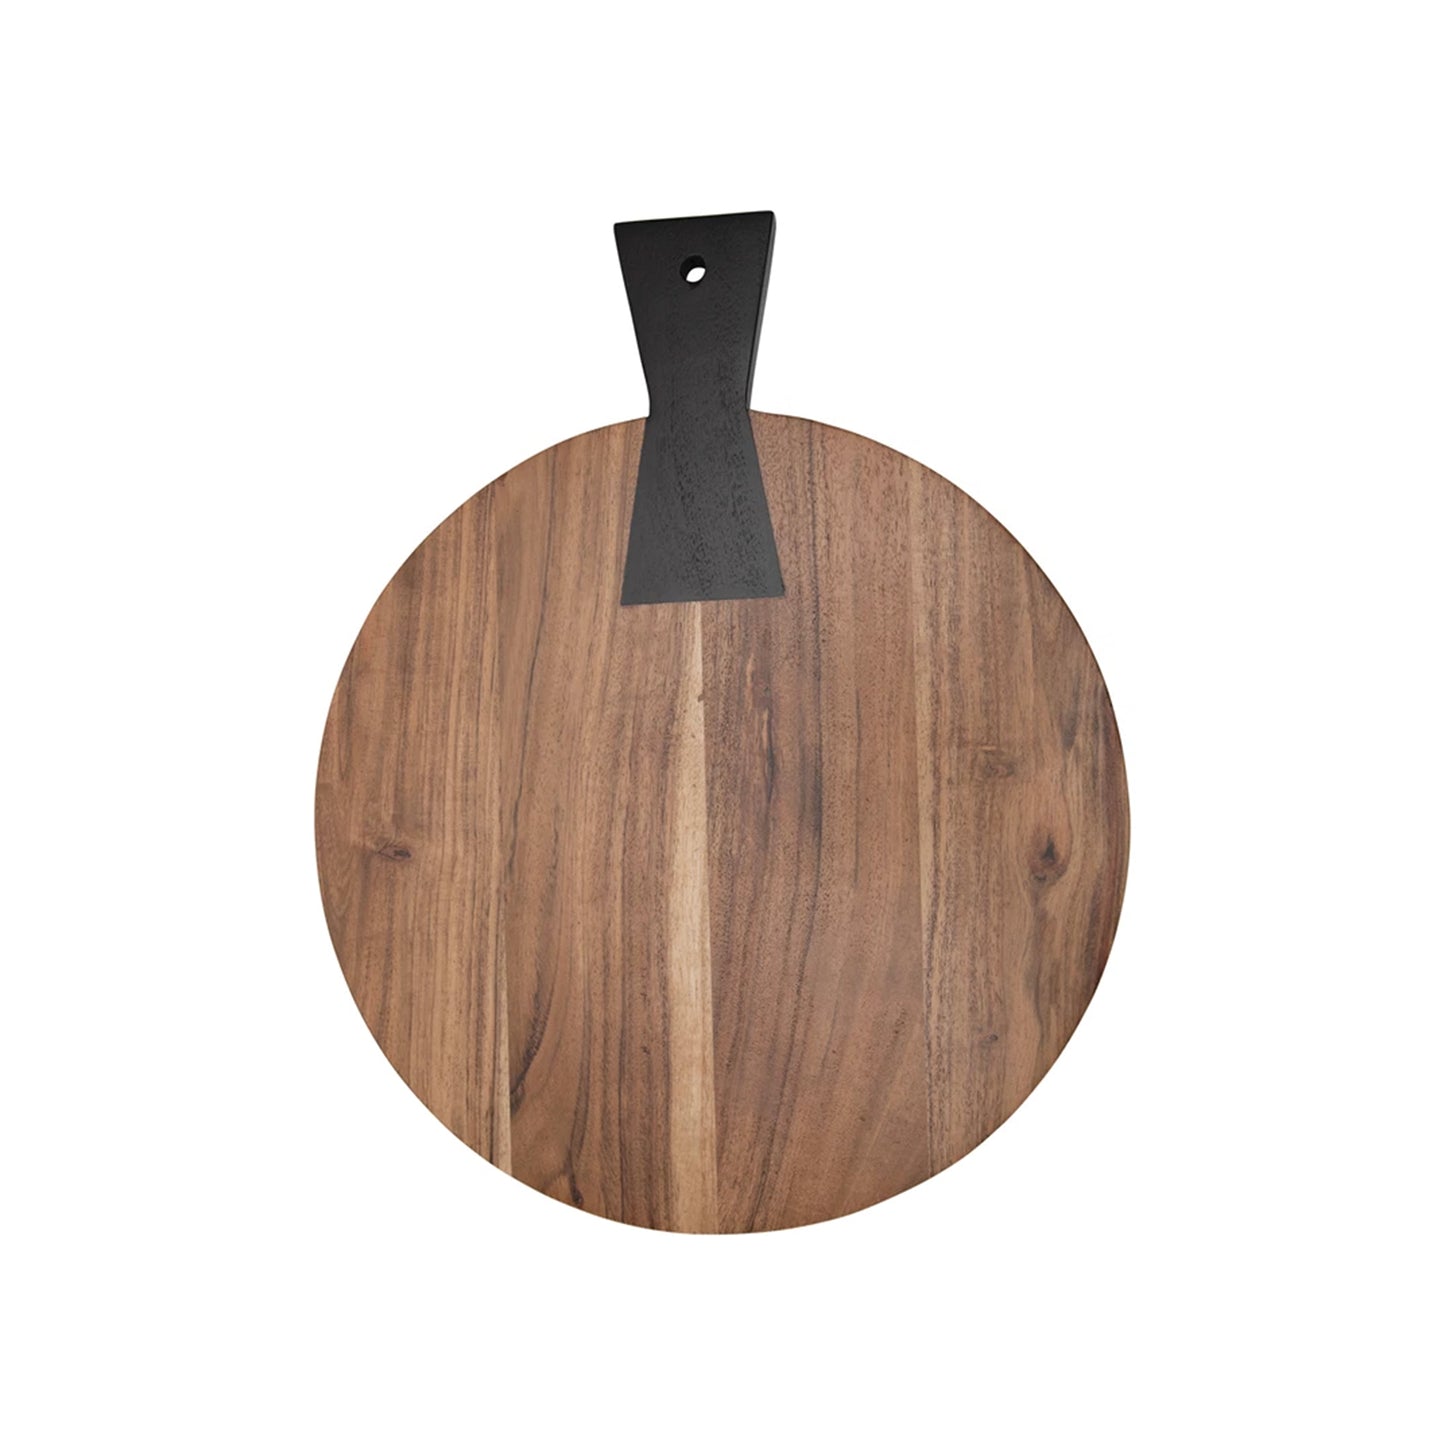 ROUND ACACIA WOOD BOARD WITH CONTRAST HANDLE